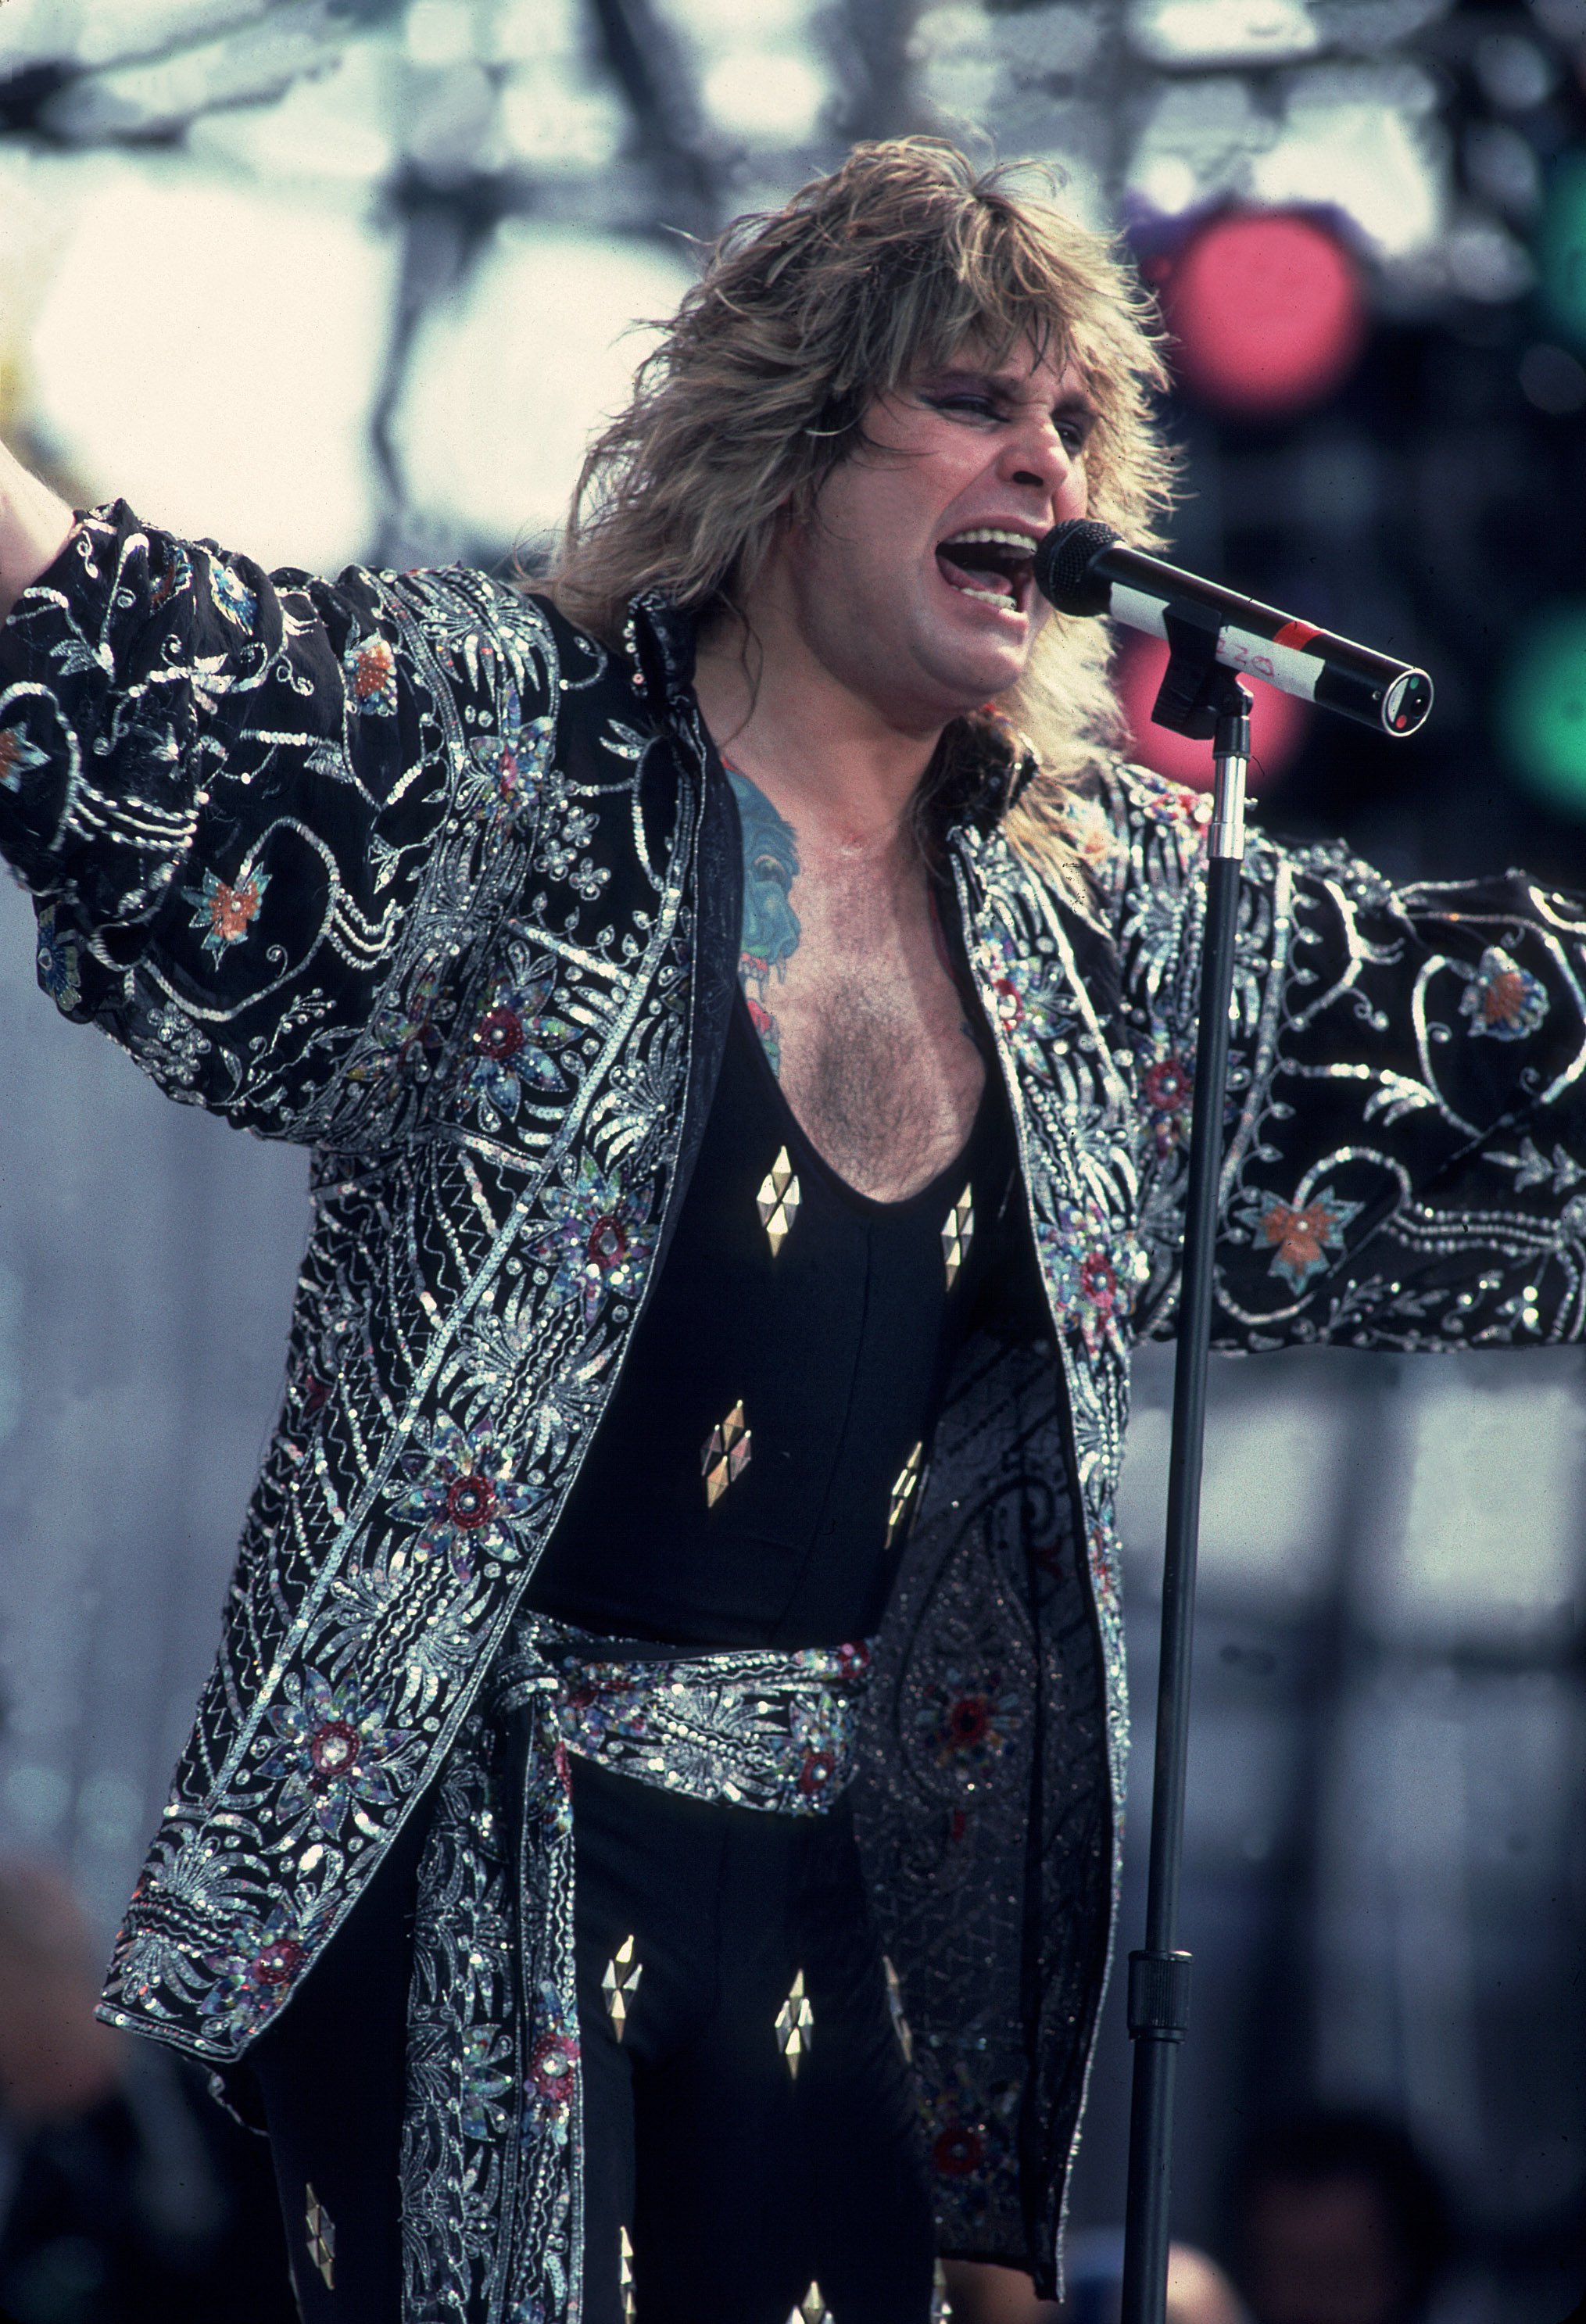 Ozzy Osbourne performs with Black Sabbath for the Live Aid Concert, in Philadelphia, Pennsylvania, on July 13, 1985 | Source: Getty Images